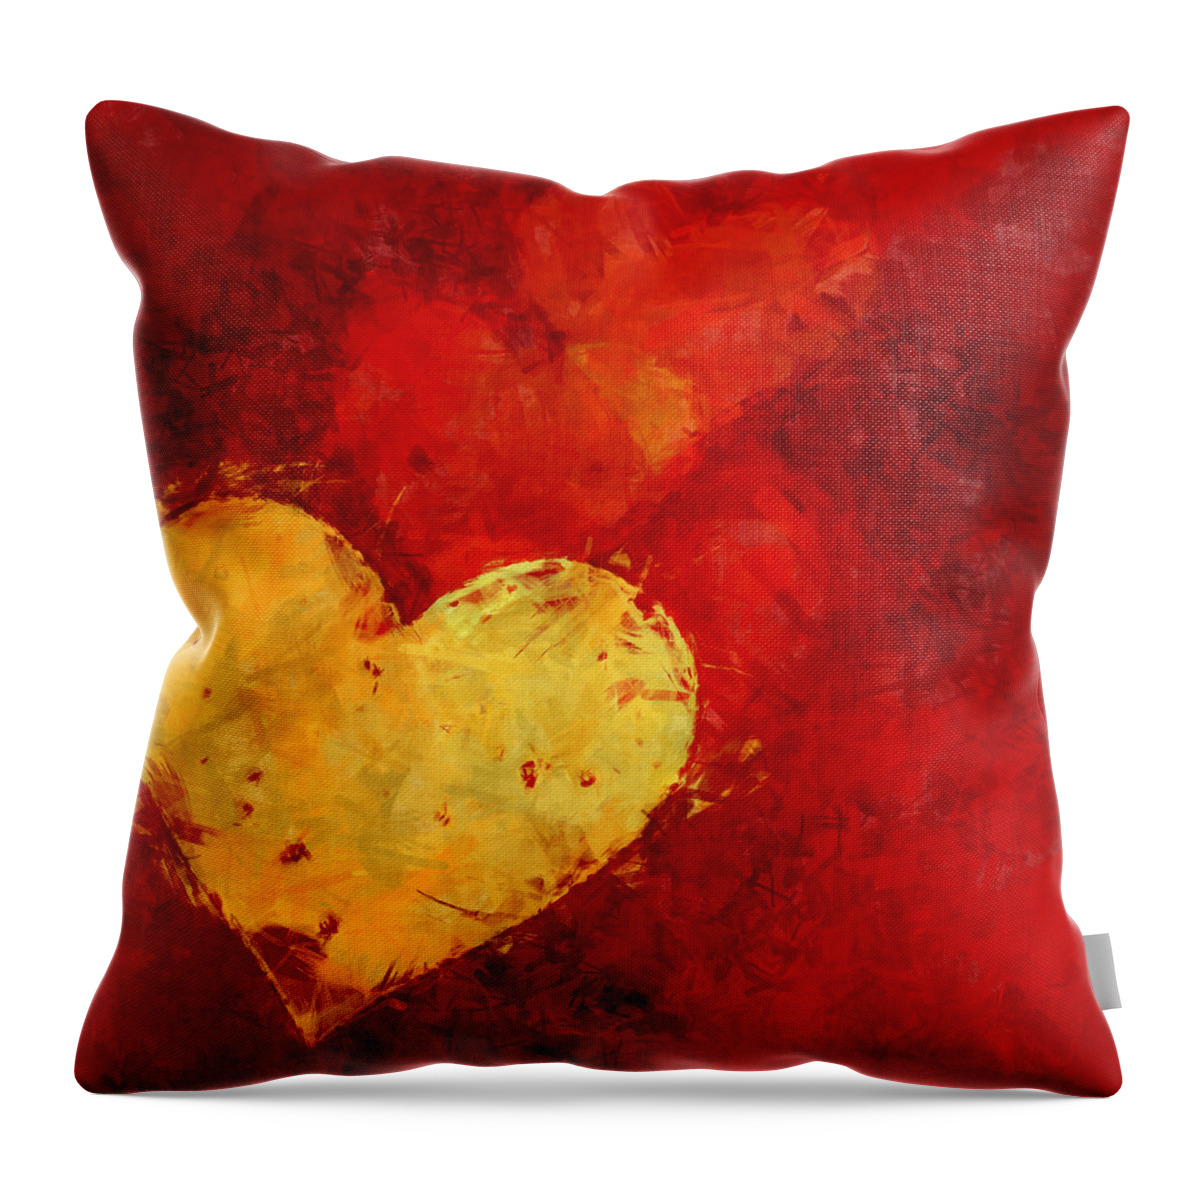 Heart Throw Pillow featuring the digital art Floating Hearts Painted by Kurt Van Wagner